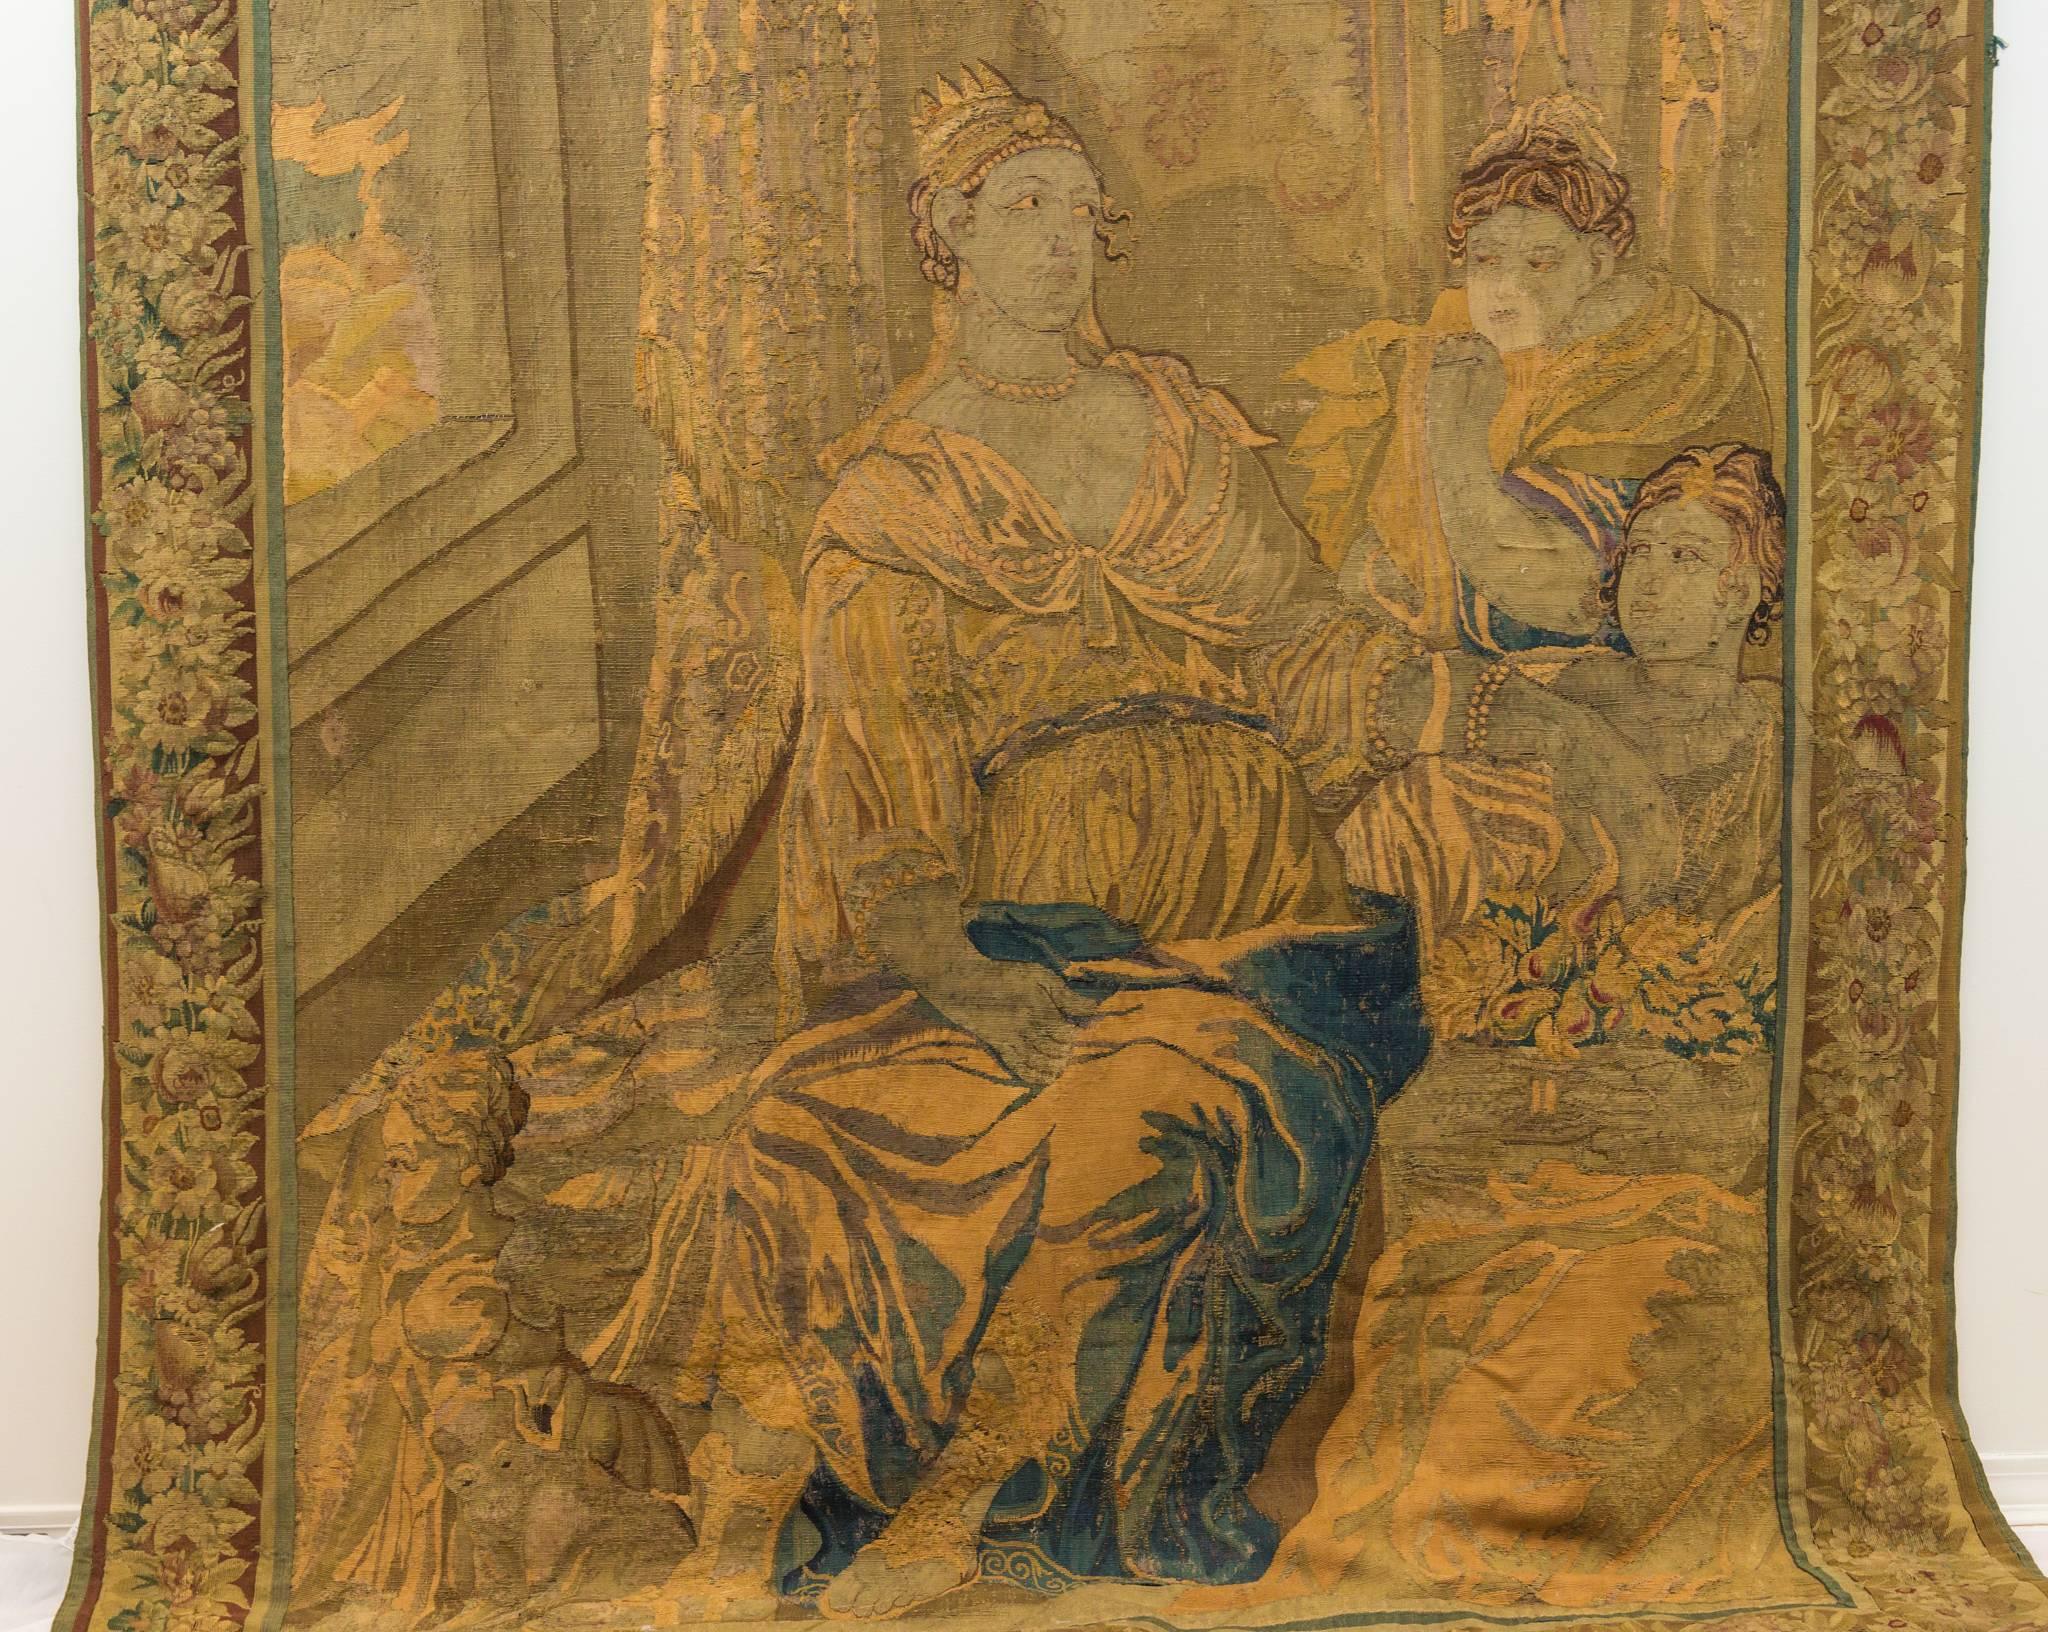 Handwoven wool tapestry mid-late 18th century Brussels figural scene depicting three females in lavishly decorated sitting room with open window. Crowned Queen dressed in pearl necklaces and bracelets, draped gown and detailed sandals. Two ladies in